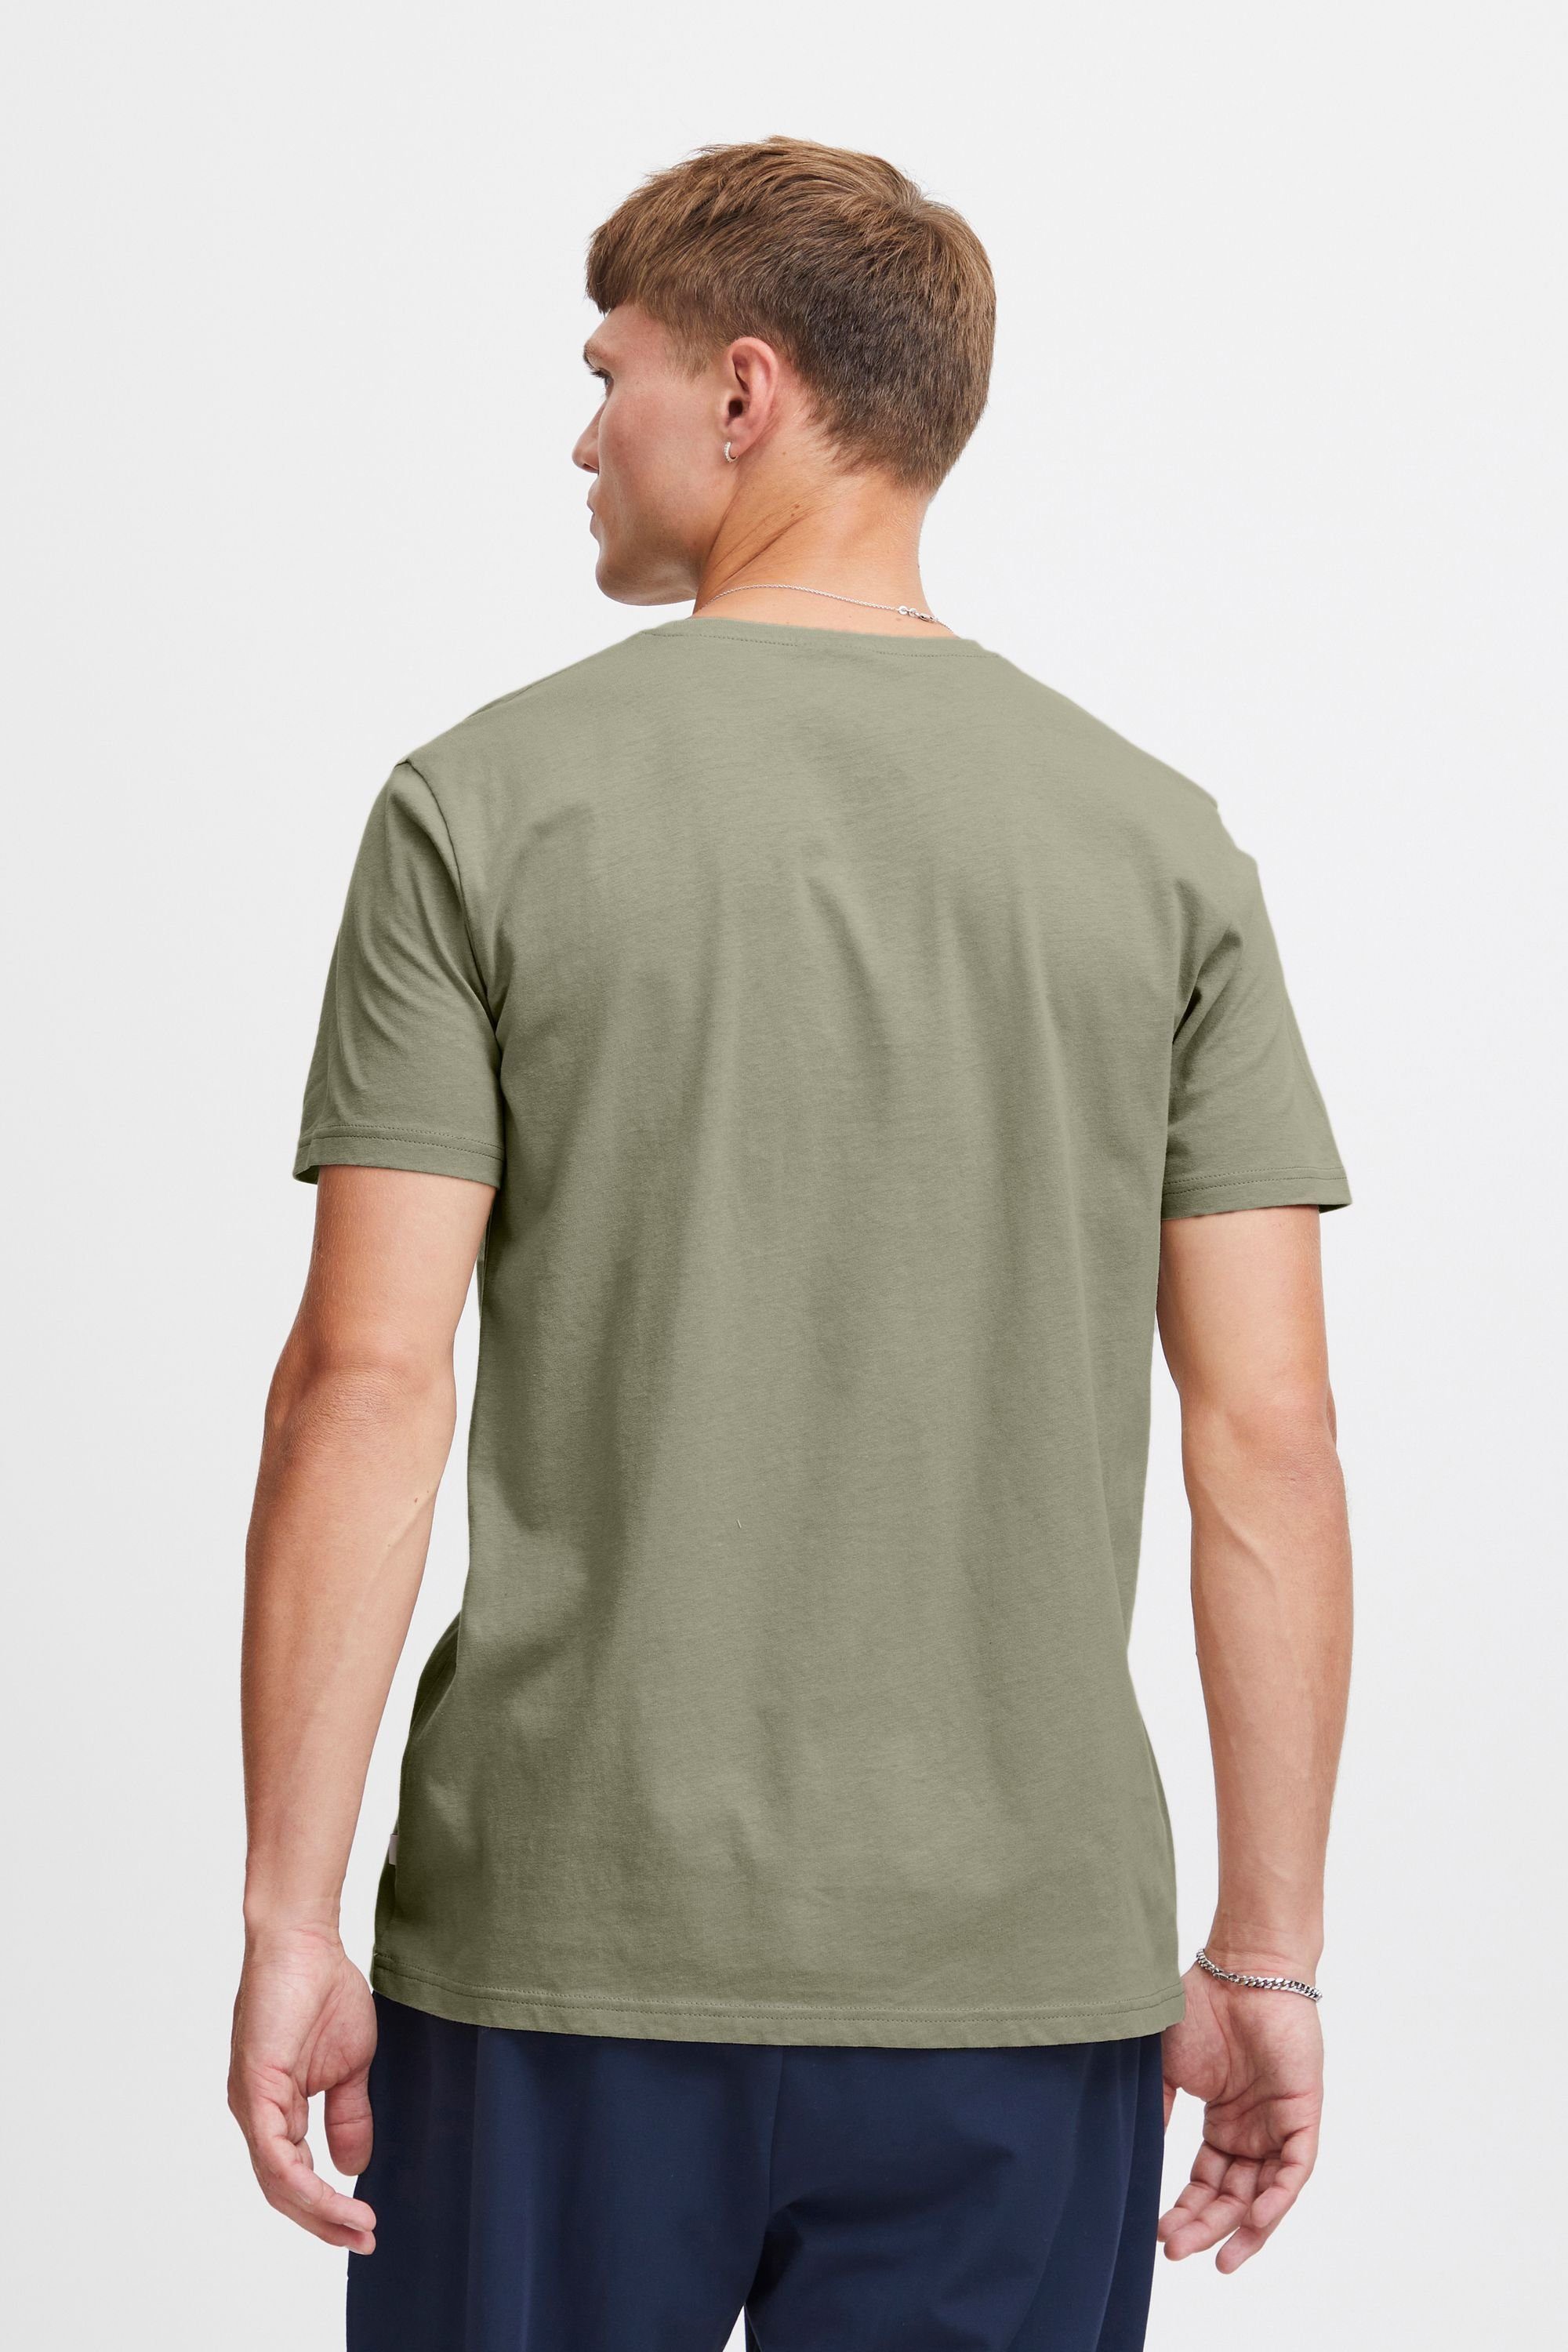 Solid T-Shirt 6194761, Rock SS - - Tee (170613) Vetiver 21103651